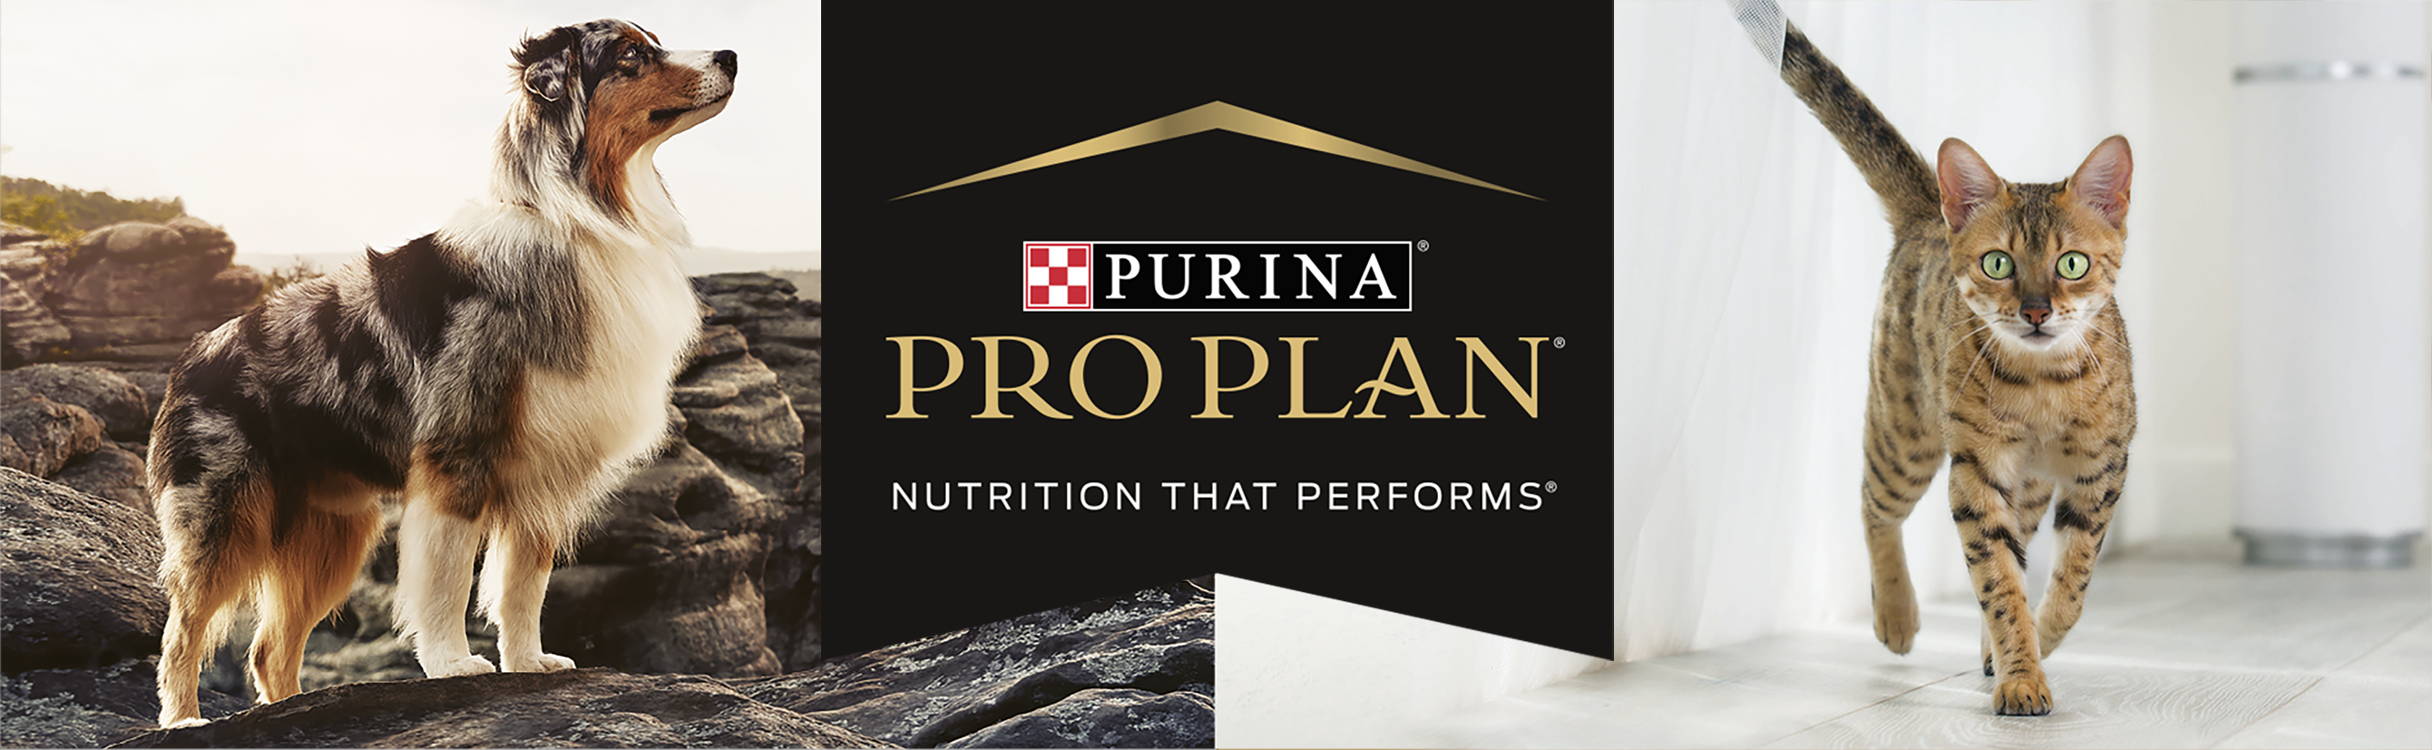 Pro Plan nutrition that performs